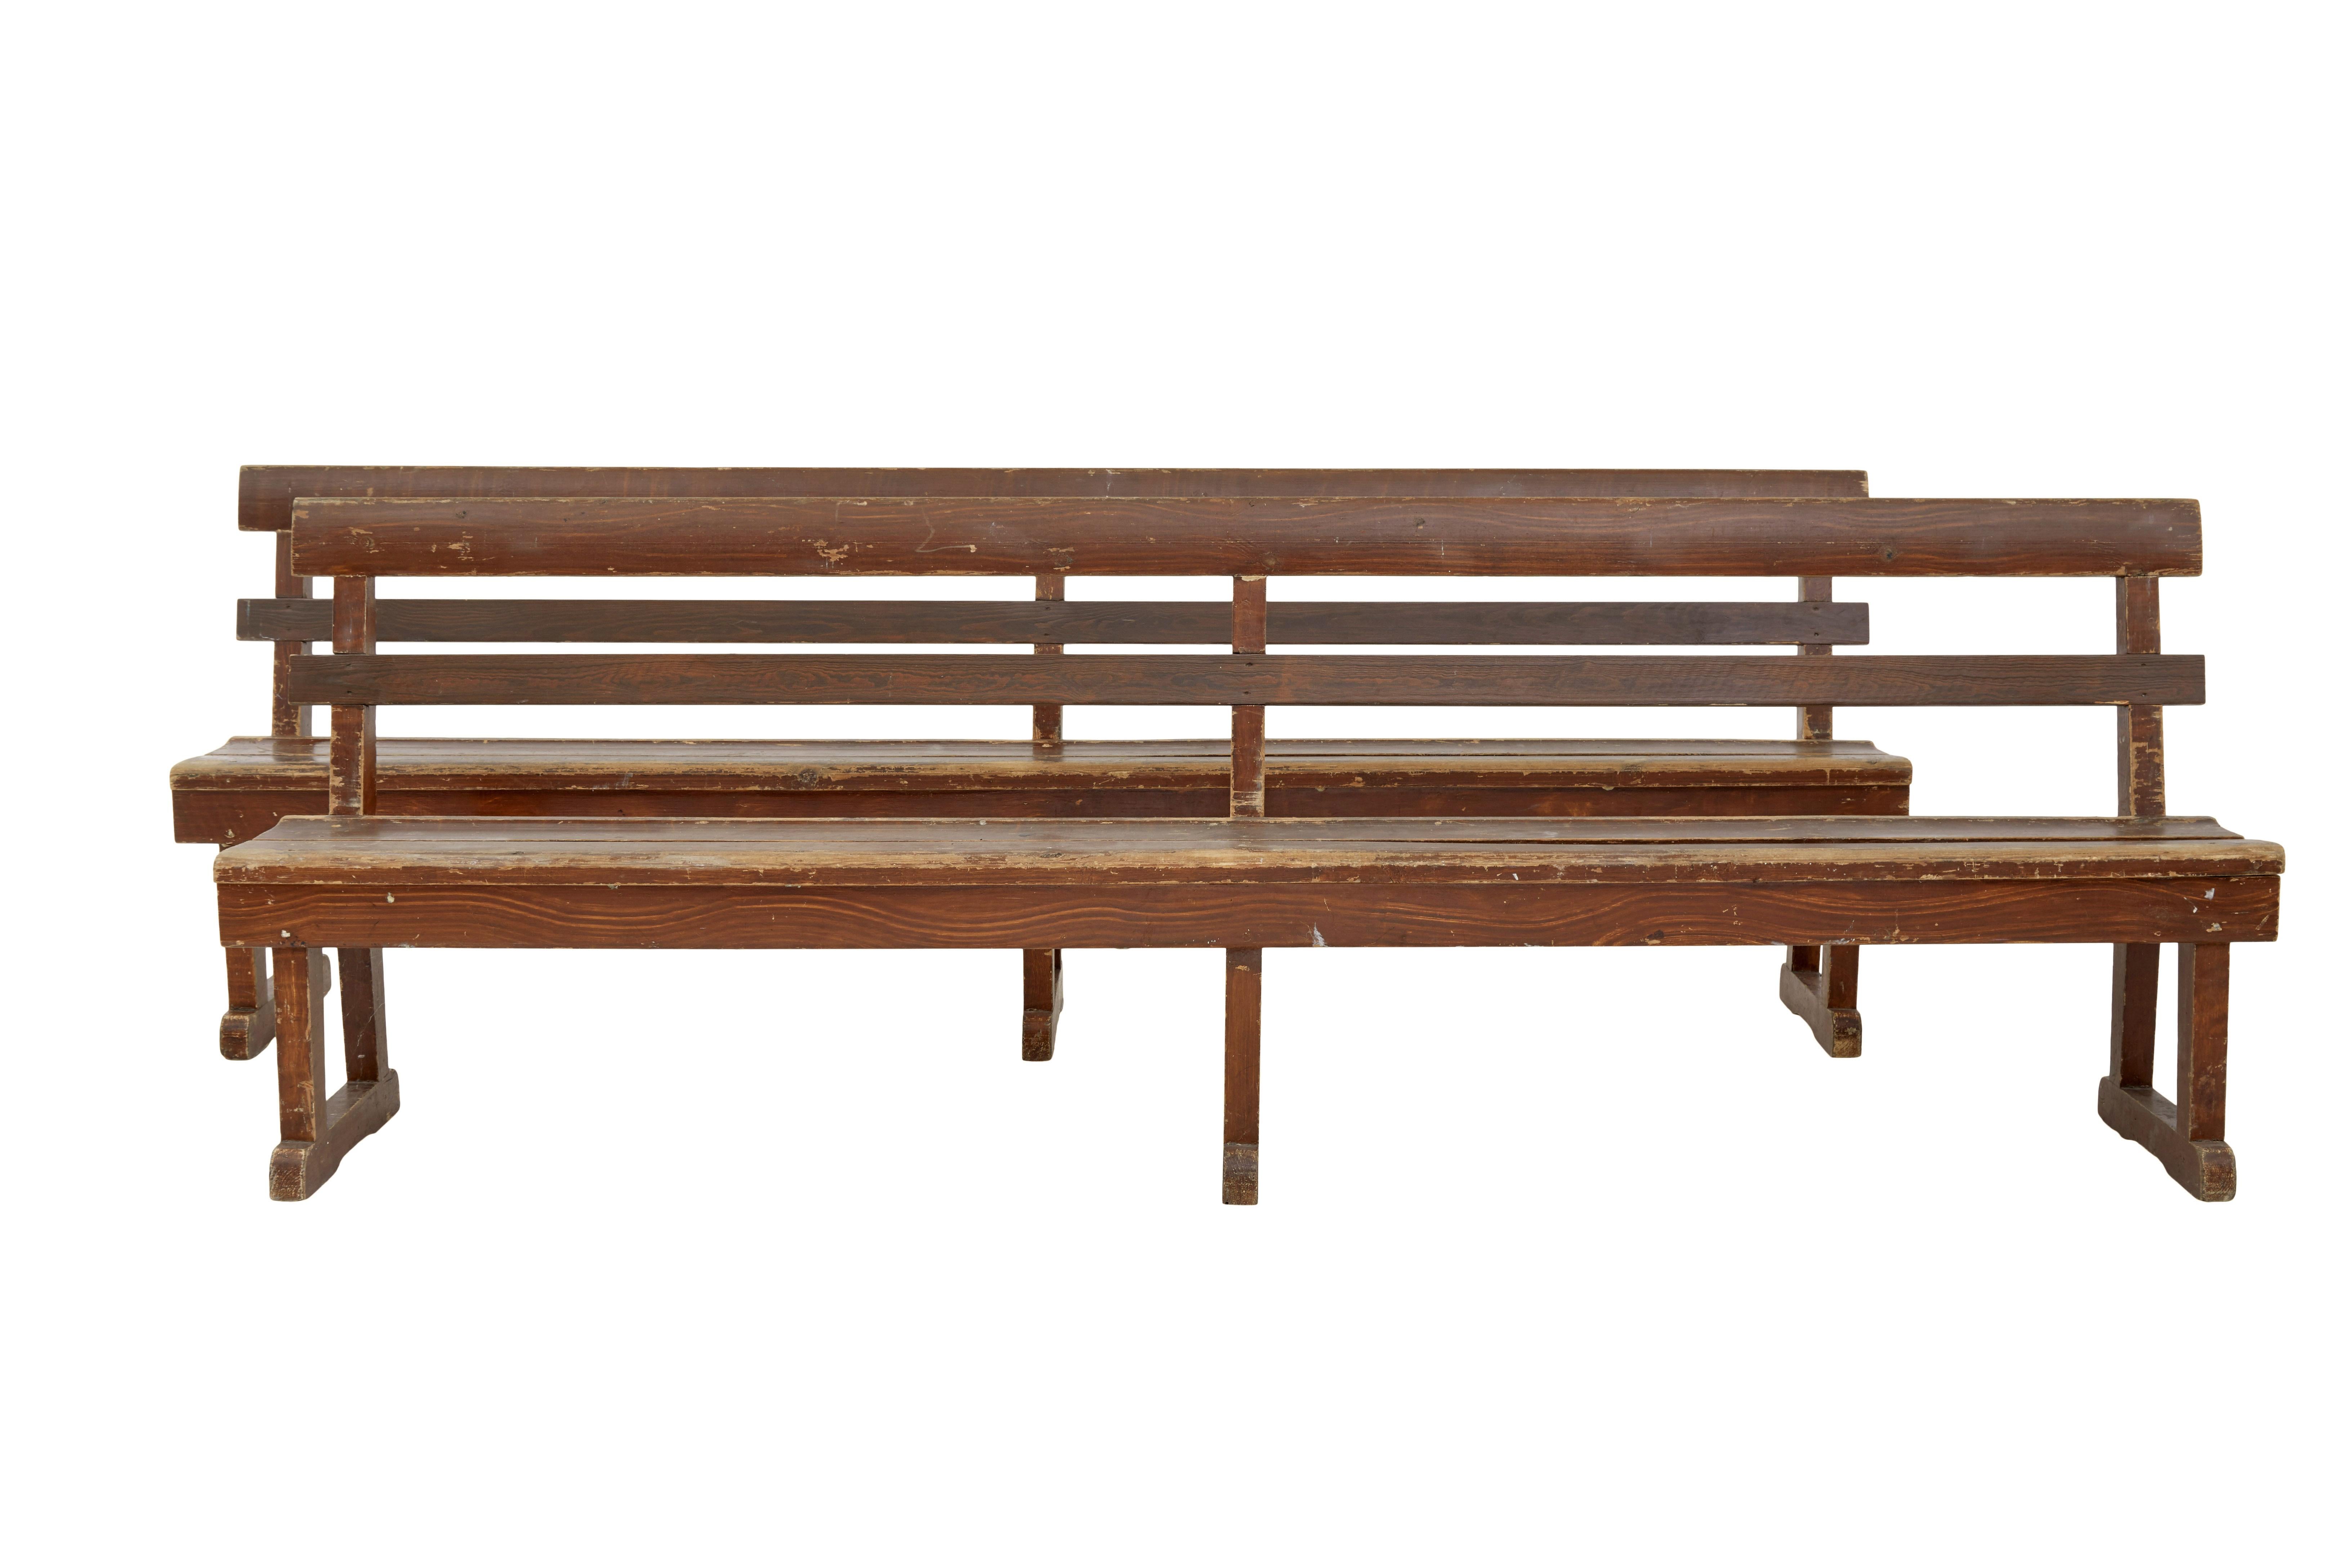 Pair of Scandinavian painted pine benches circa 1890.

Good quality rustic pair of Swedish painted benches made in pine.  These almost certainly would have been on rail station or somewhere similar.

2 plank backs with a 2 plank seat, each supported